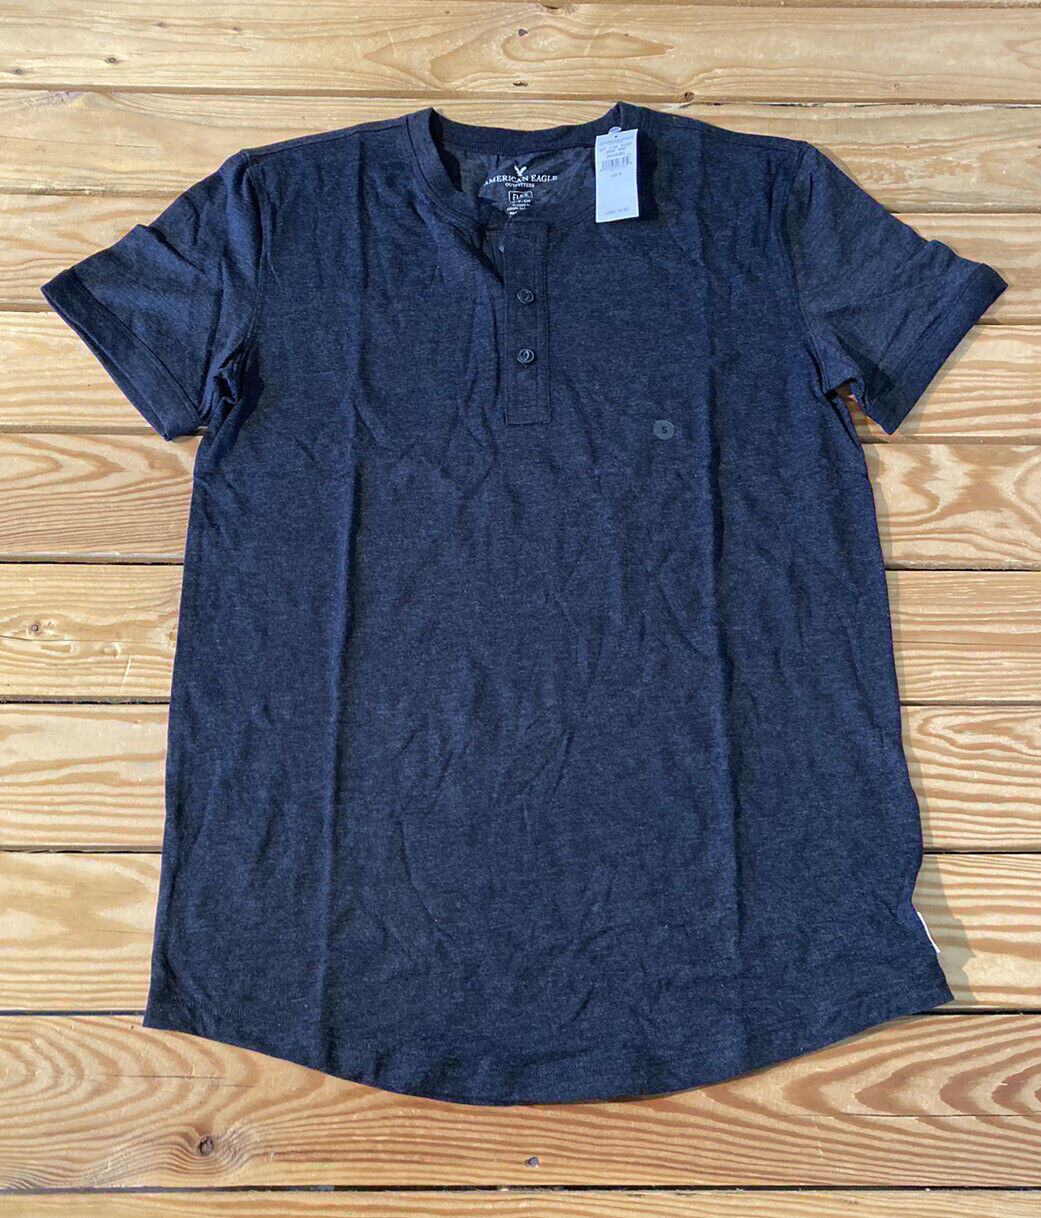 Primary image for American eagle NWT men’s 1/4 button short sleeve t Shirt size S Charcoal Q9